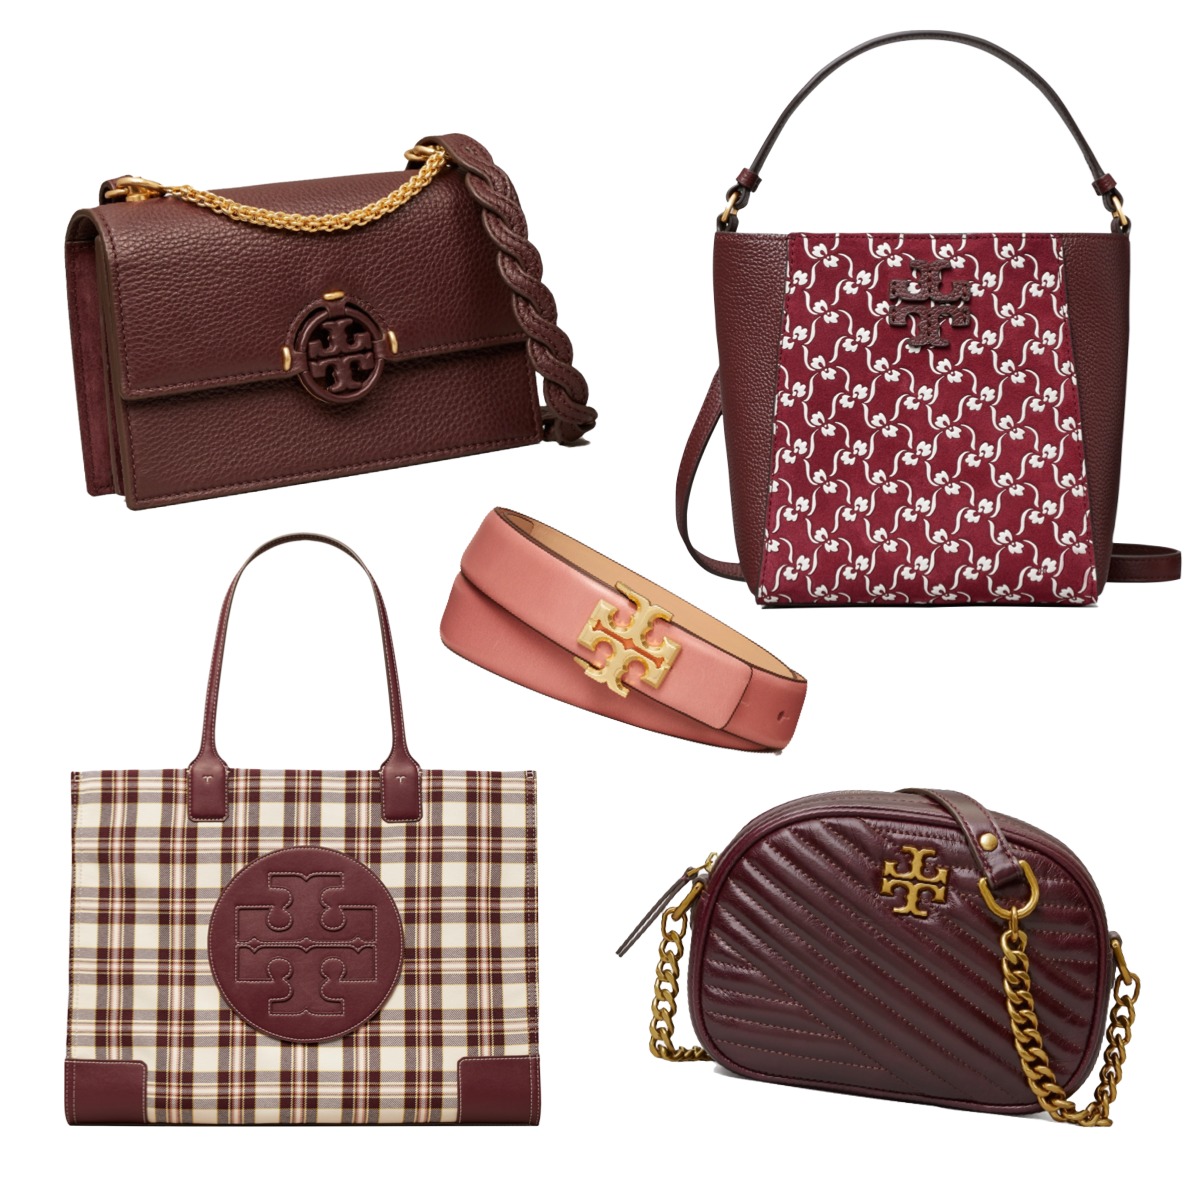 Tory Burch: Semi-Annual Sale Up to 25% off